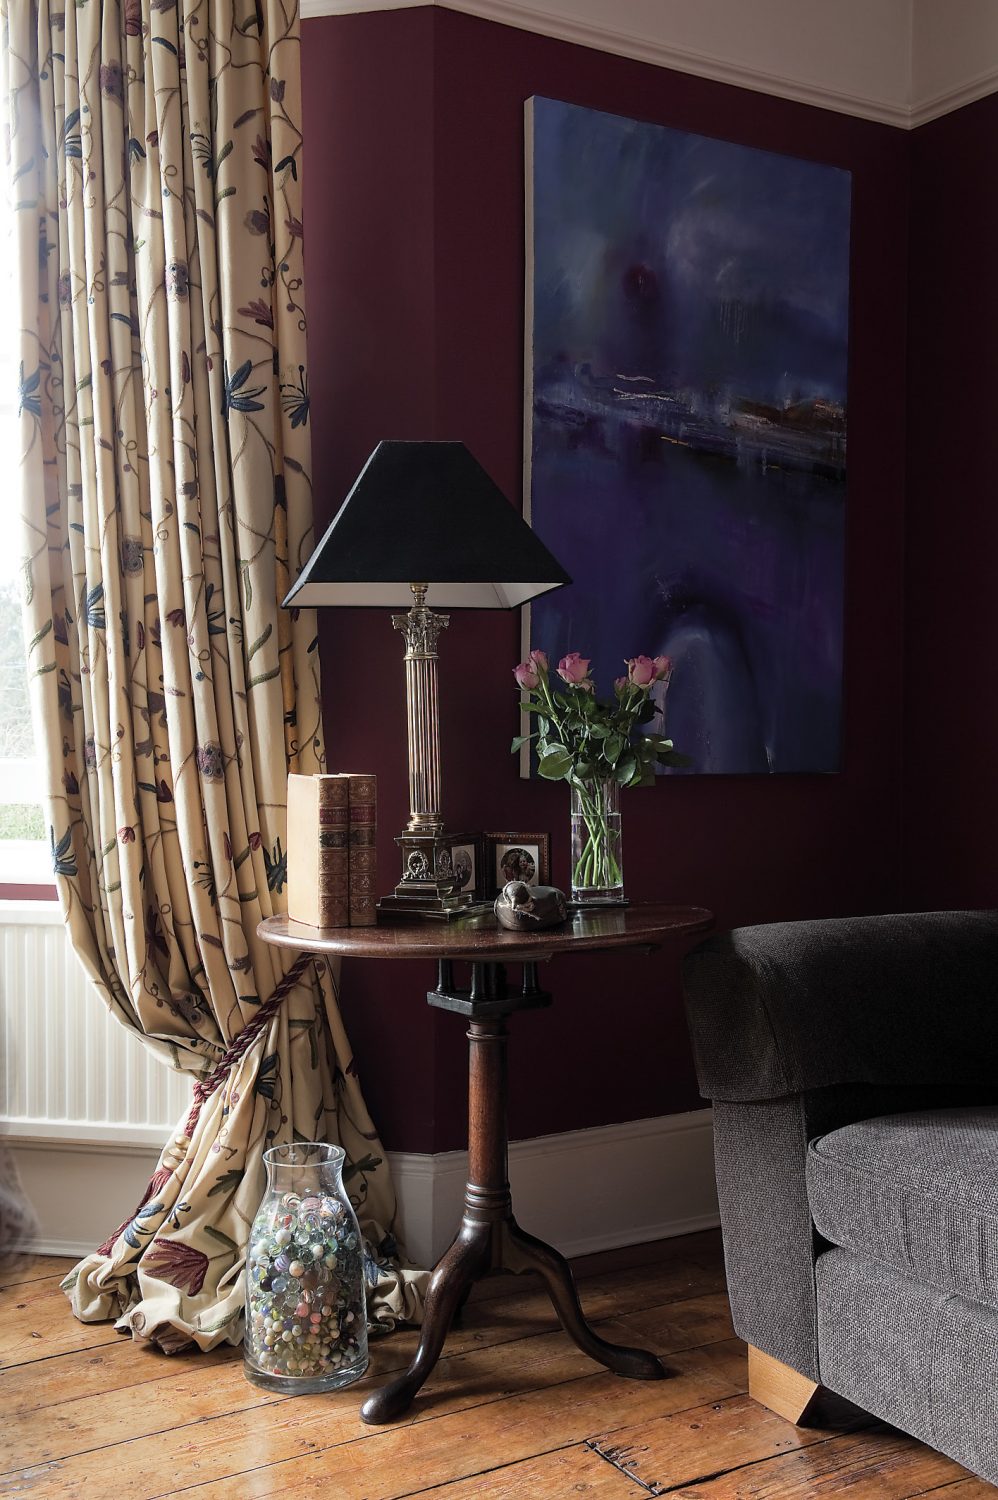 The fire blazes away in the sitting room with its magnificent marble surround and classic late Regency/early Victorian grate. An ornate gilded mirror stands on the mantelshelf along with storm lanterns and scented candles to perfume the air